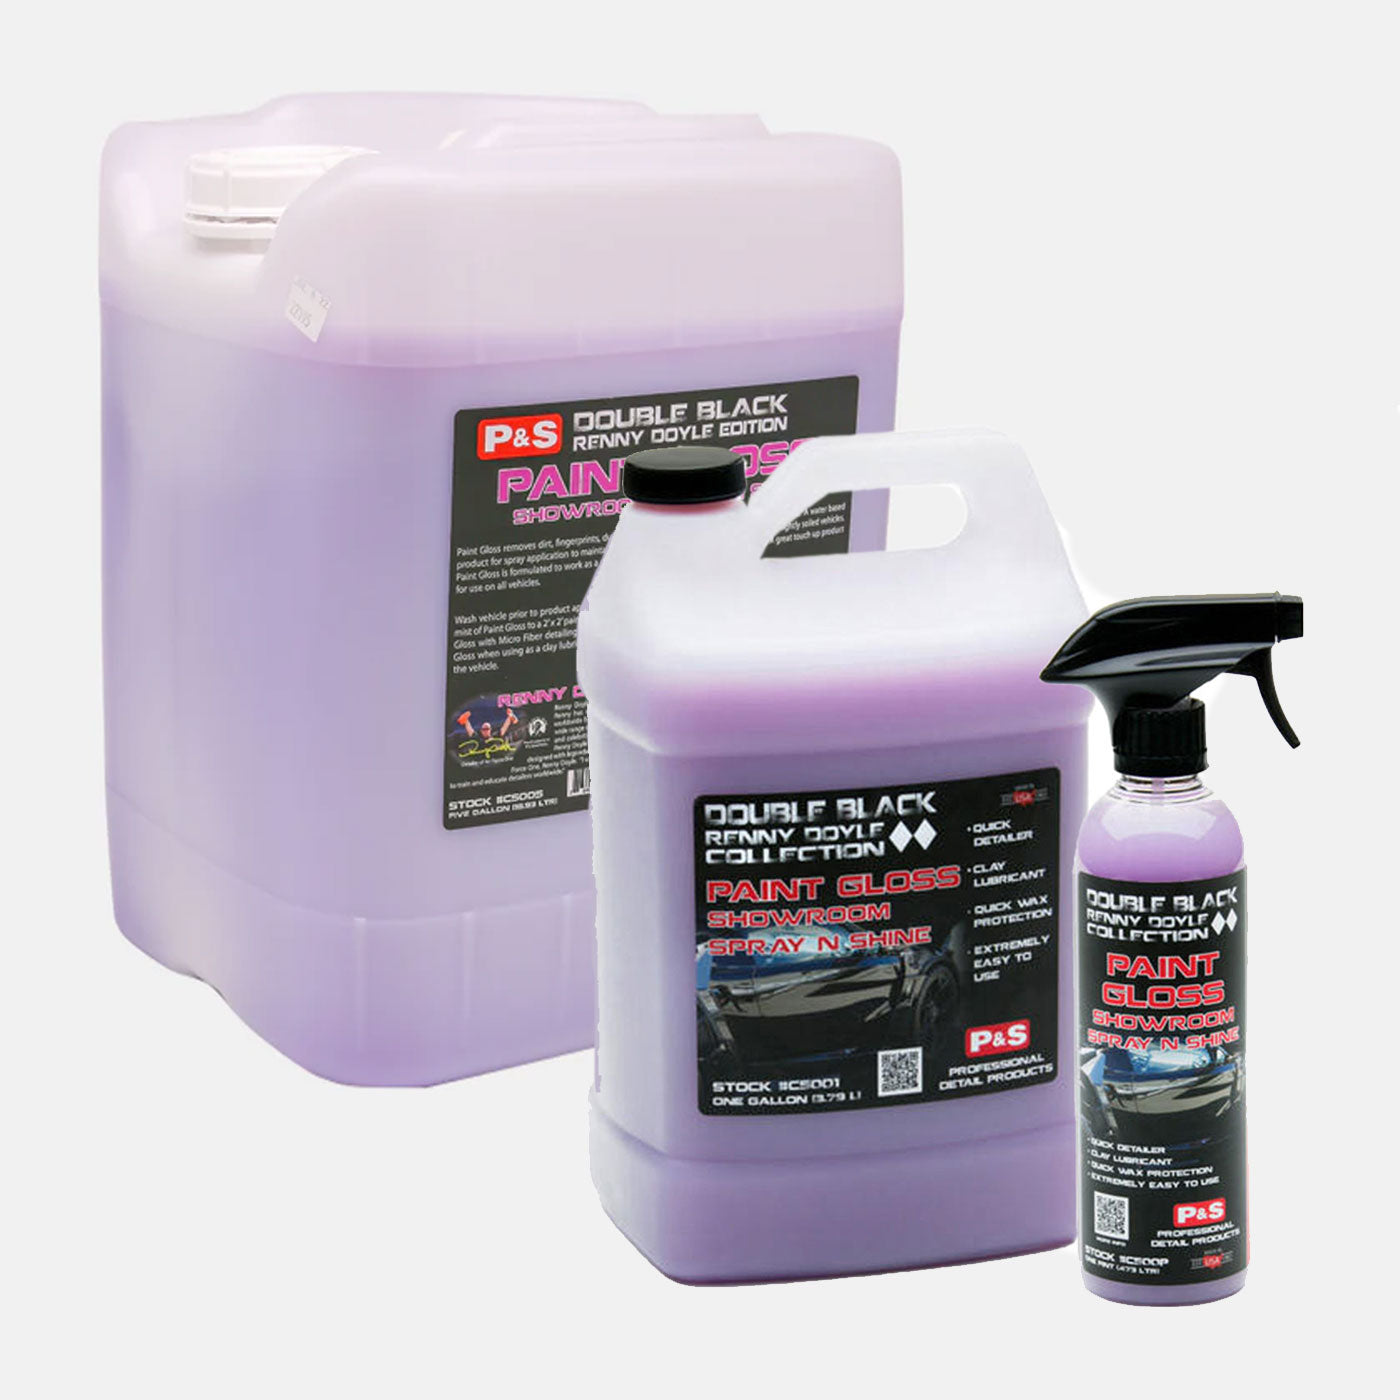 P&S Paint Prep And Glass Cleaner 1 GAL